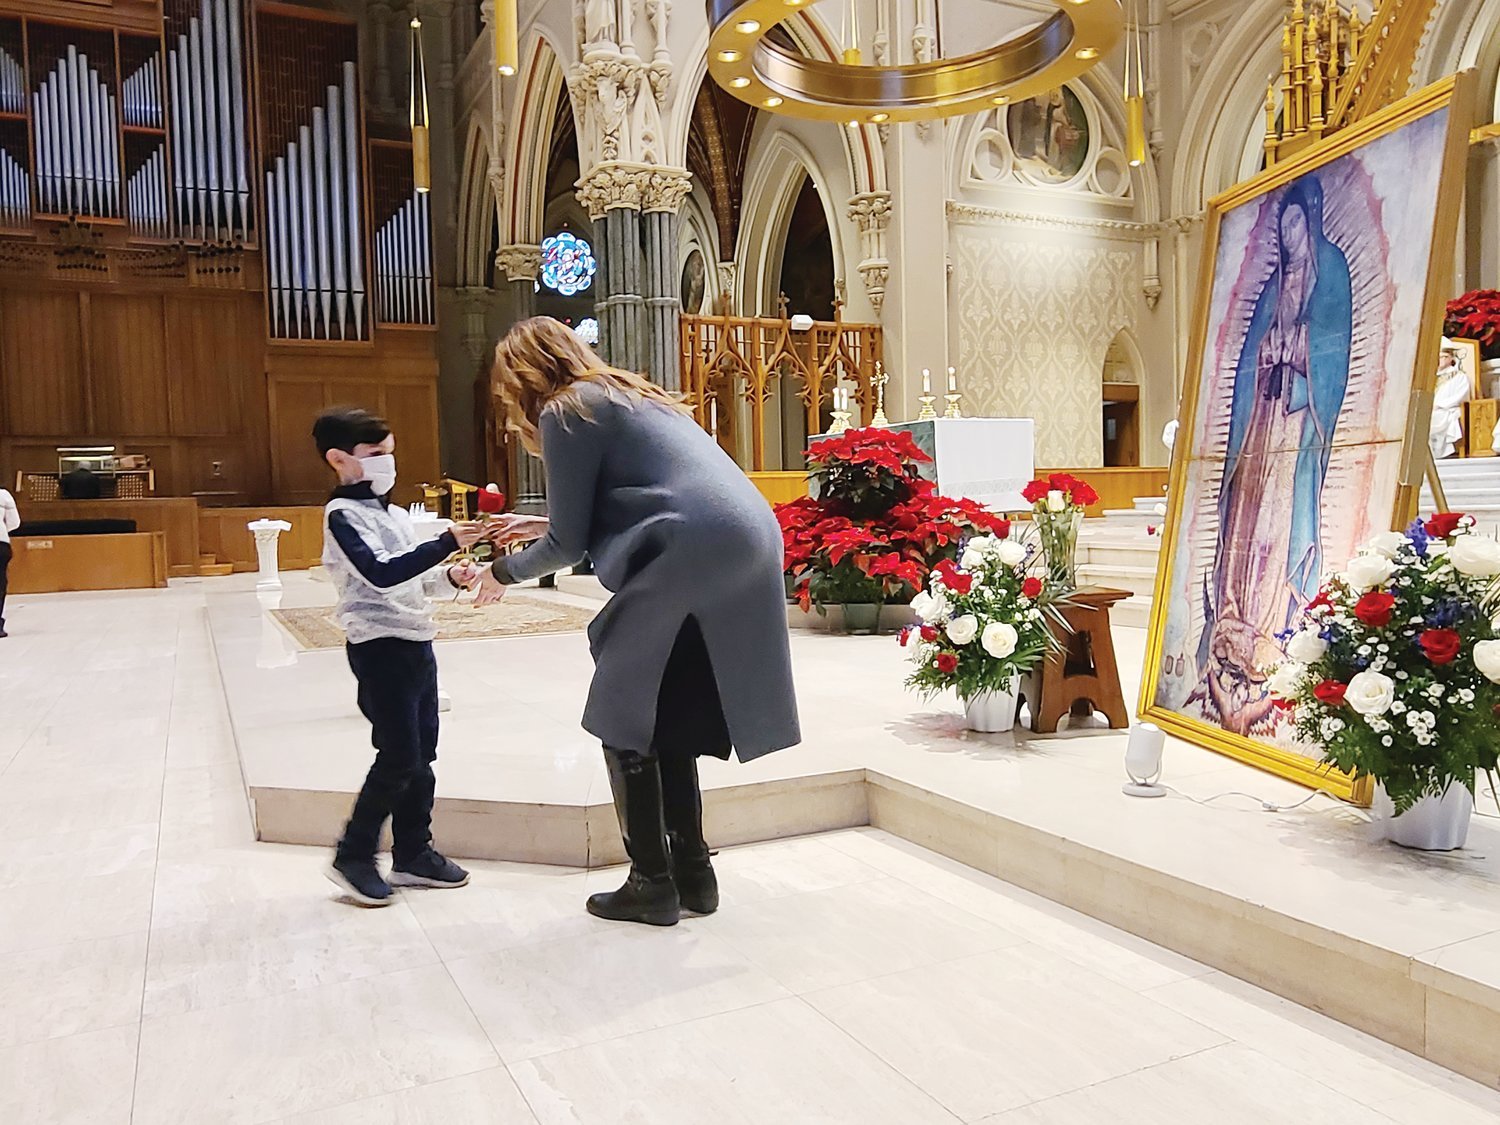 Lisa Cooley, the coordinator for the Diocese of Providence’s Office of Life & Family, helps a young parishioner from St. Charles Borromeo Church in Providence to present a rose to the pilgrimage image of Our Lady of Guadalupe during the annual Respect Life Mass at the Cathedral of Saints Peter and Paul on Jan. 23.